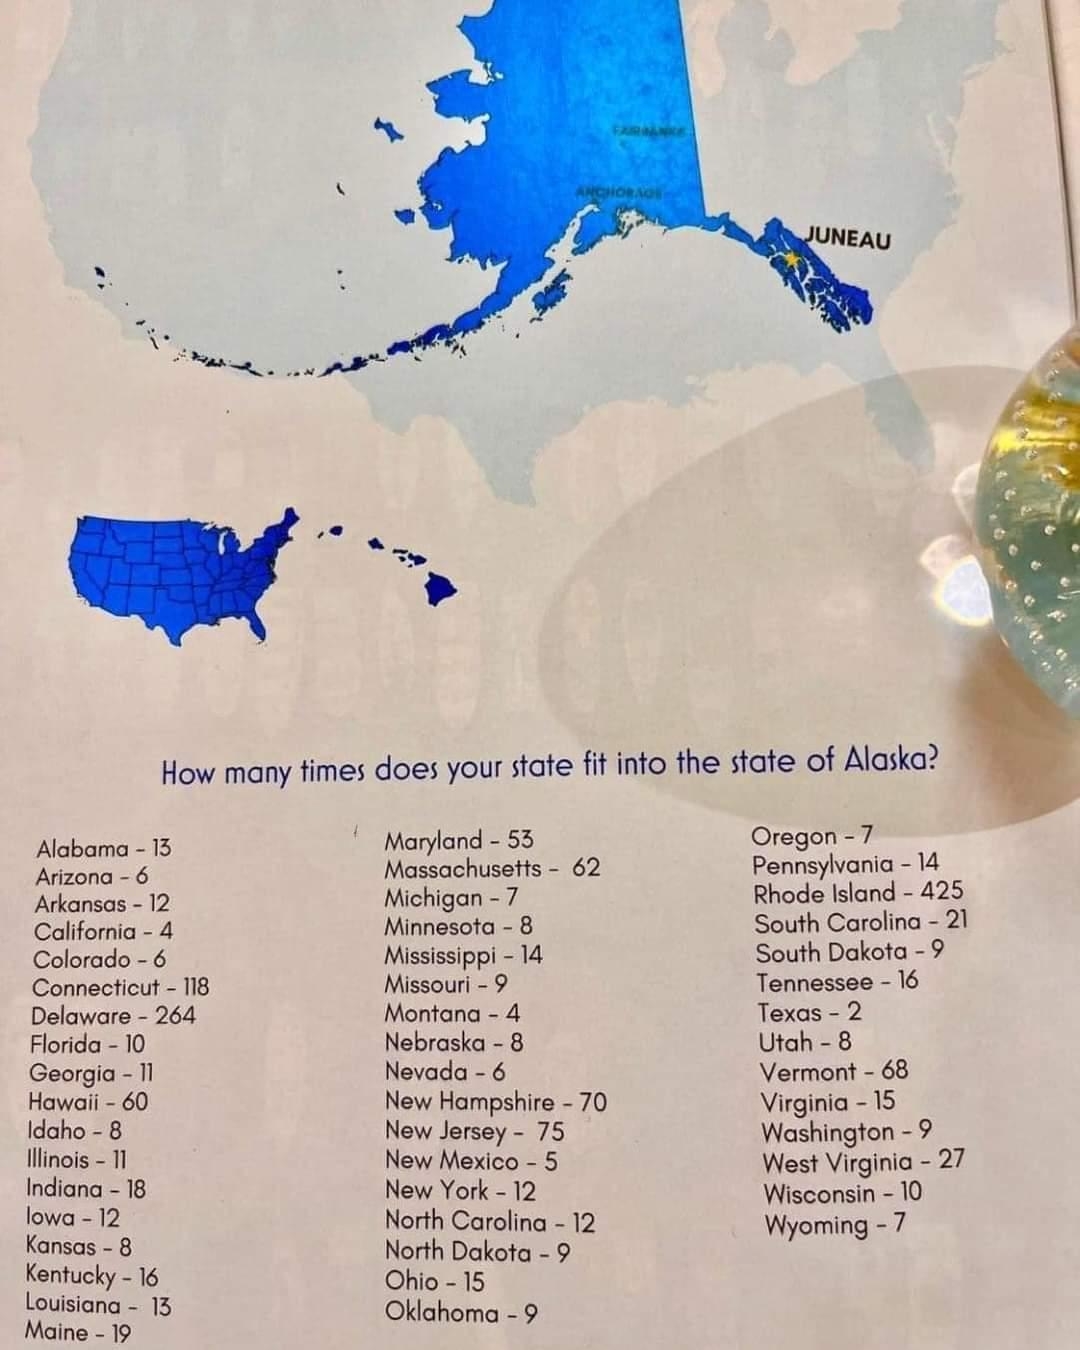 A map showing the number of times other states fit into Alaska (Iowa: 12x; Texas: 2x, Delaware: 264x)